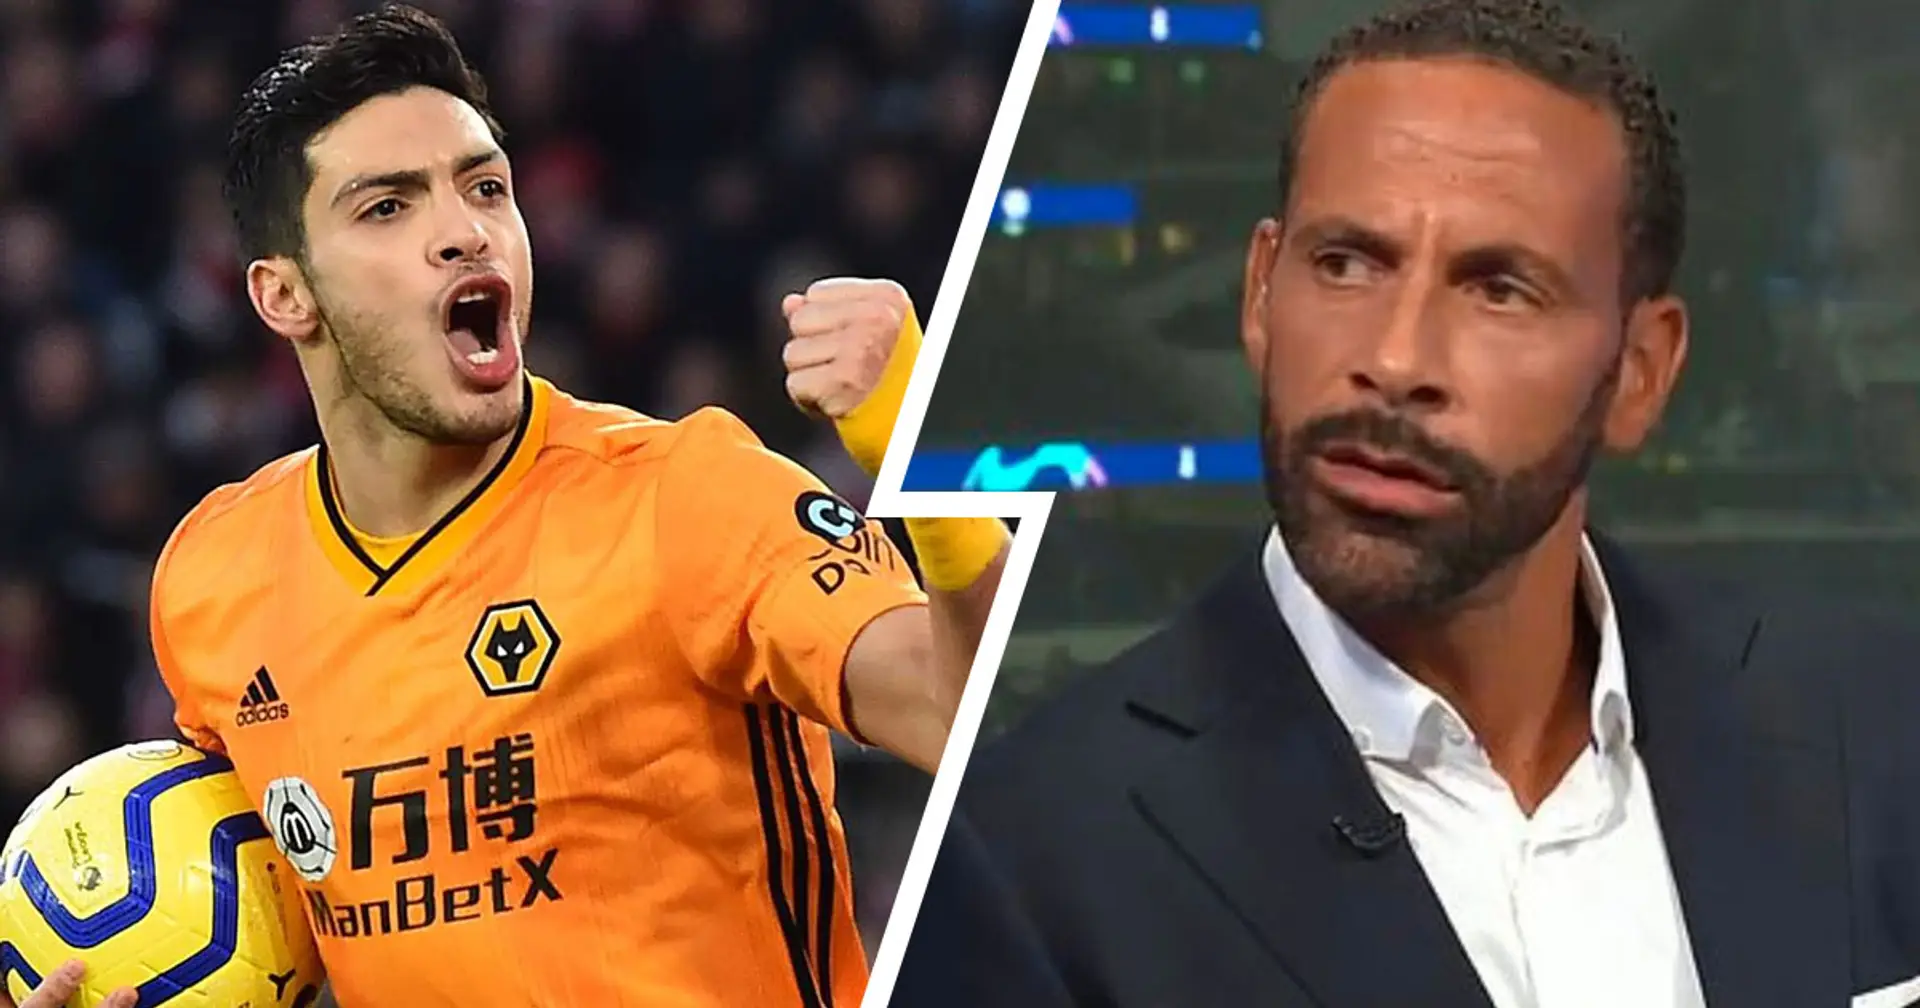 ‘He can score tremendous goals out of nothing’: Rio Ferdinand believes Jimenez can be ideal for United